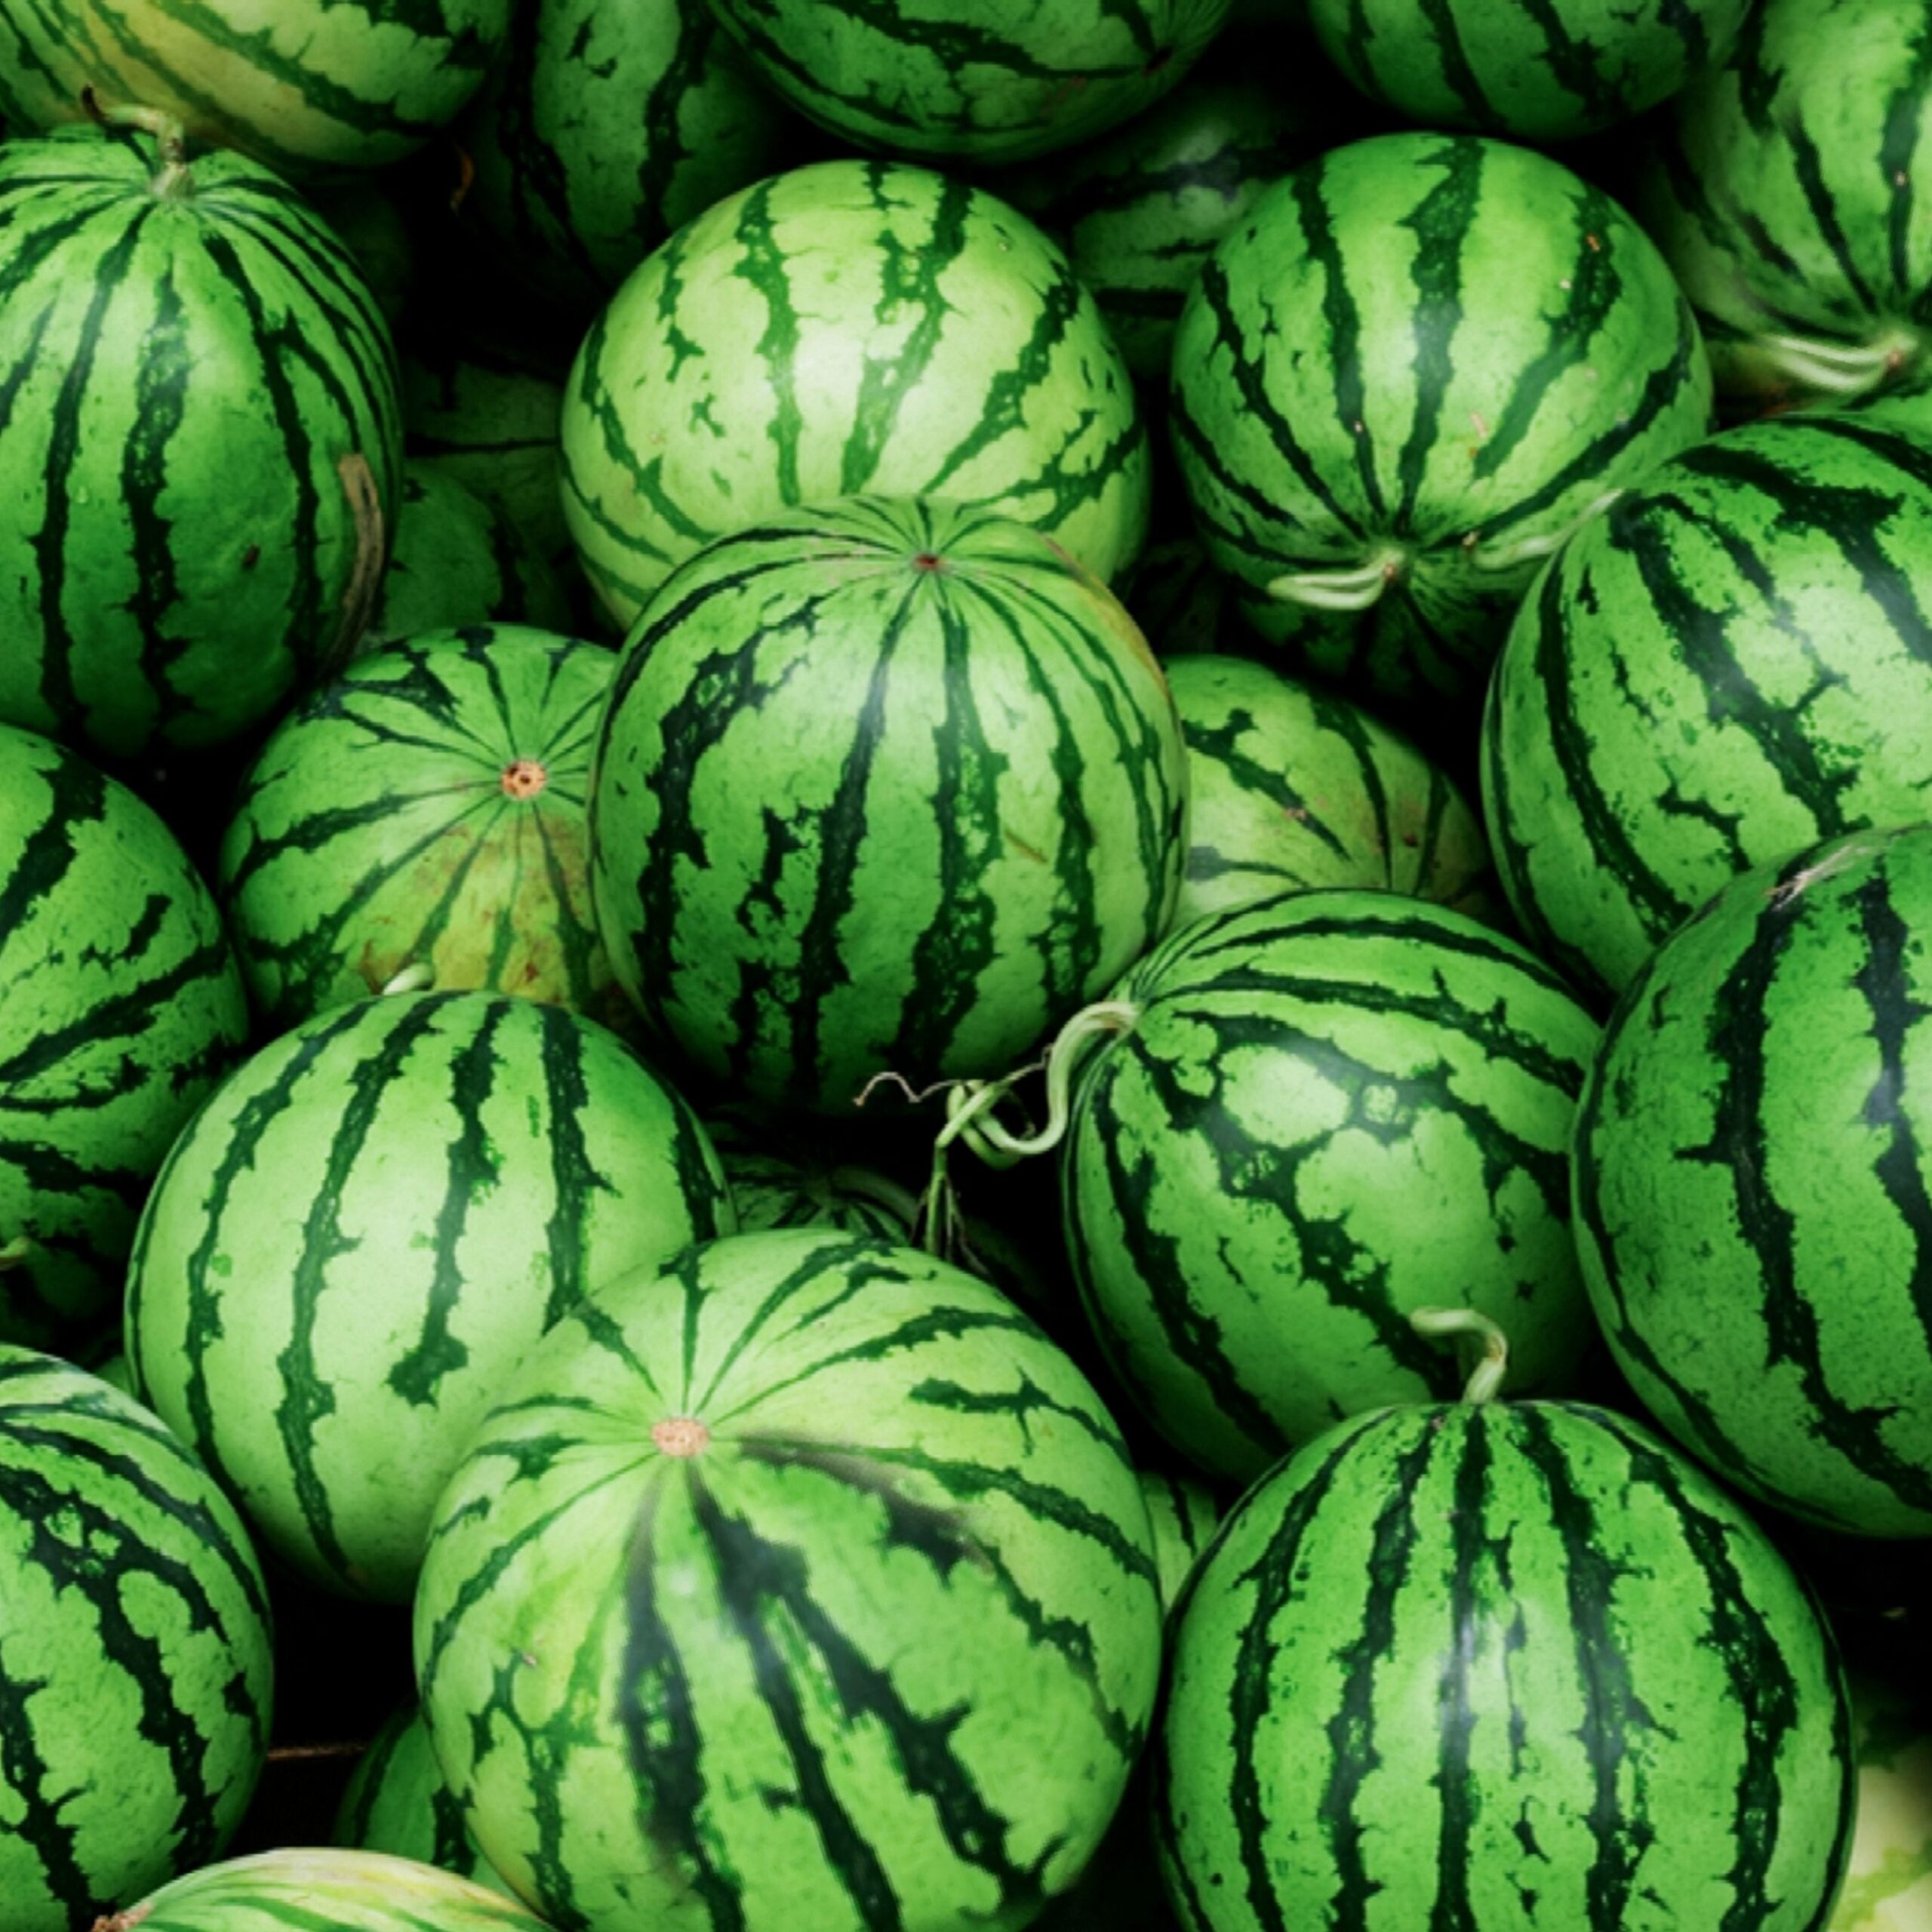 Watermelon Cultivation Declines as Farmers Succumb to Challenges